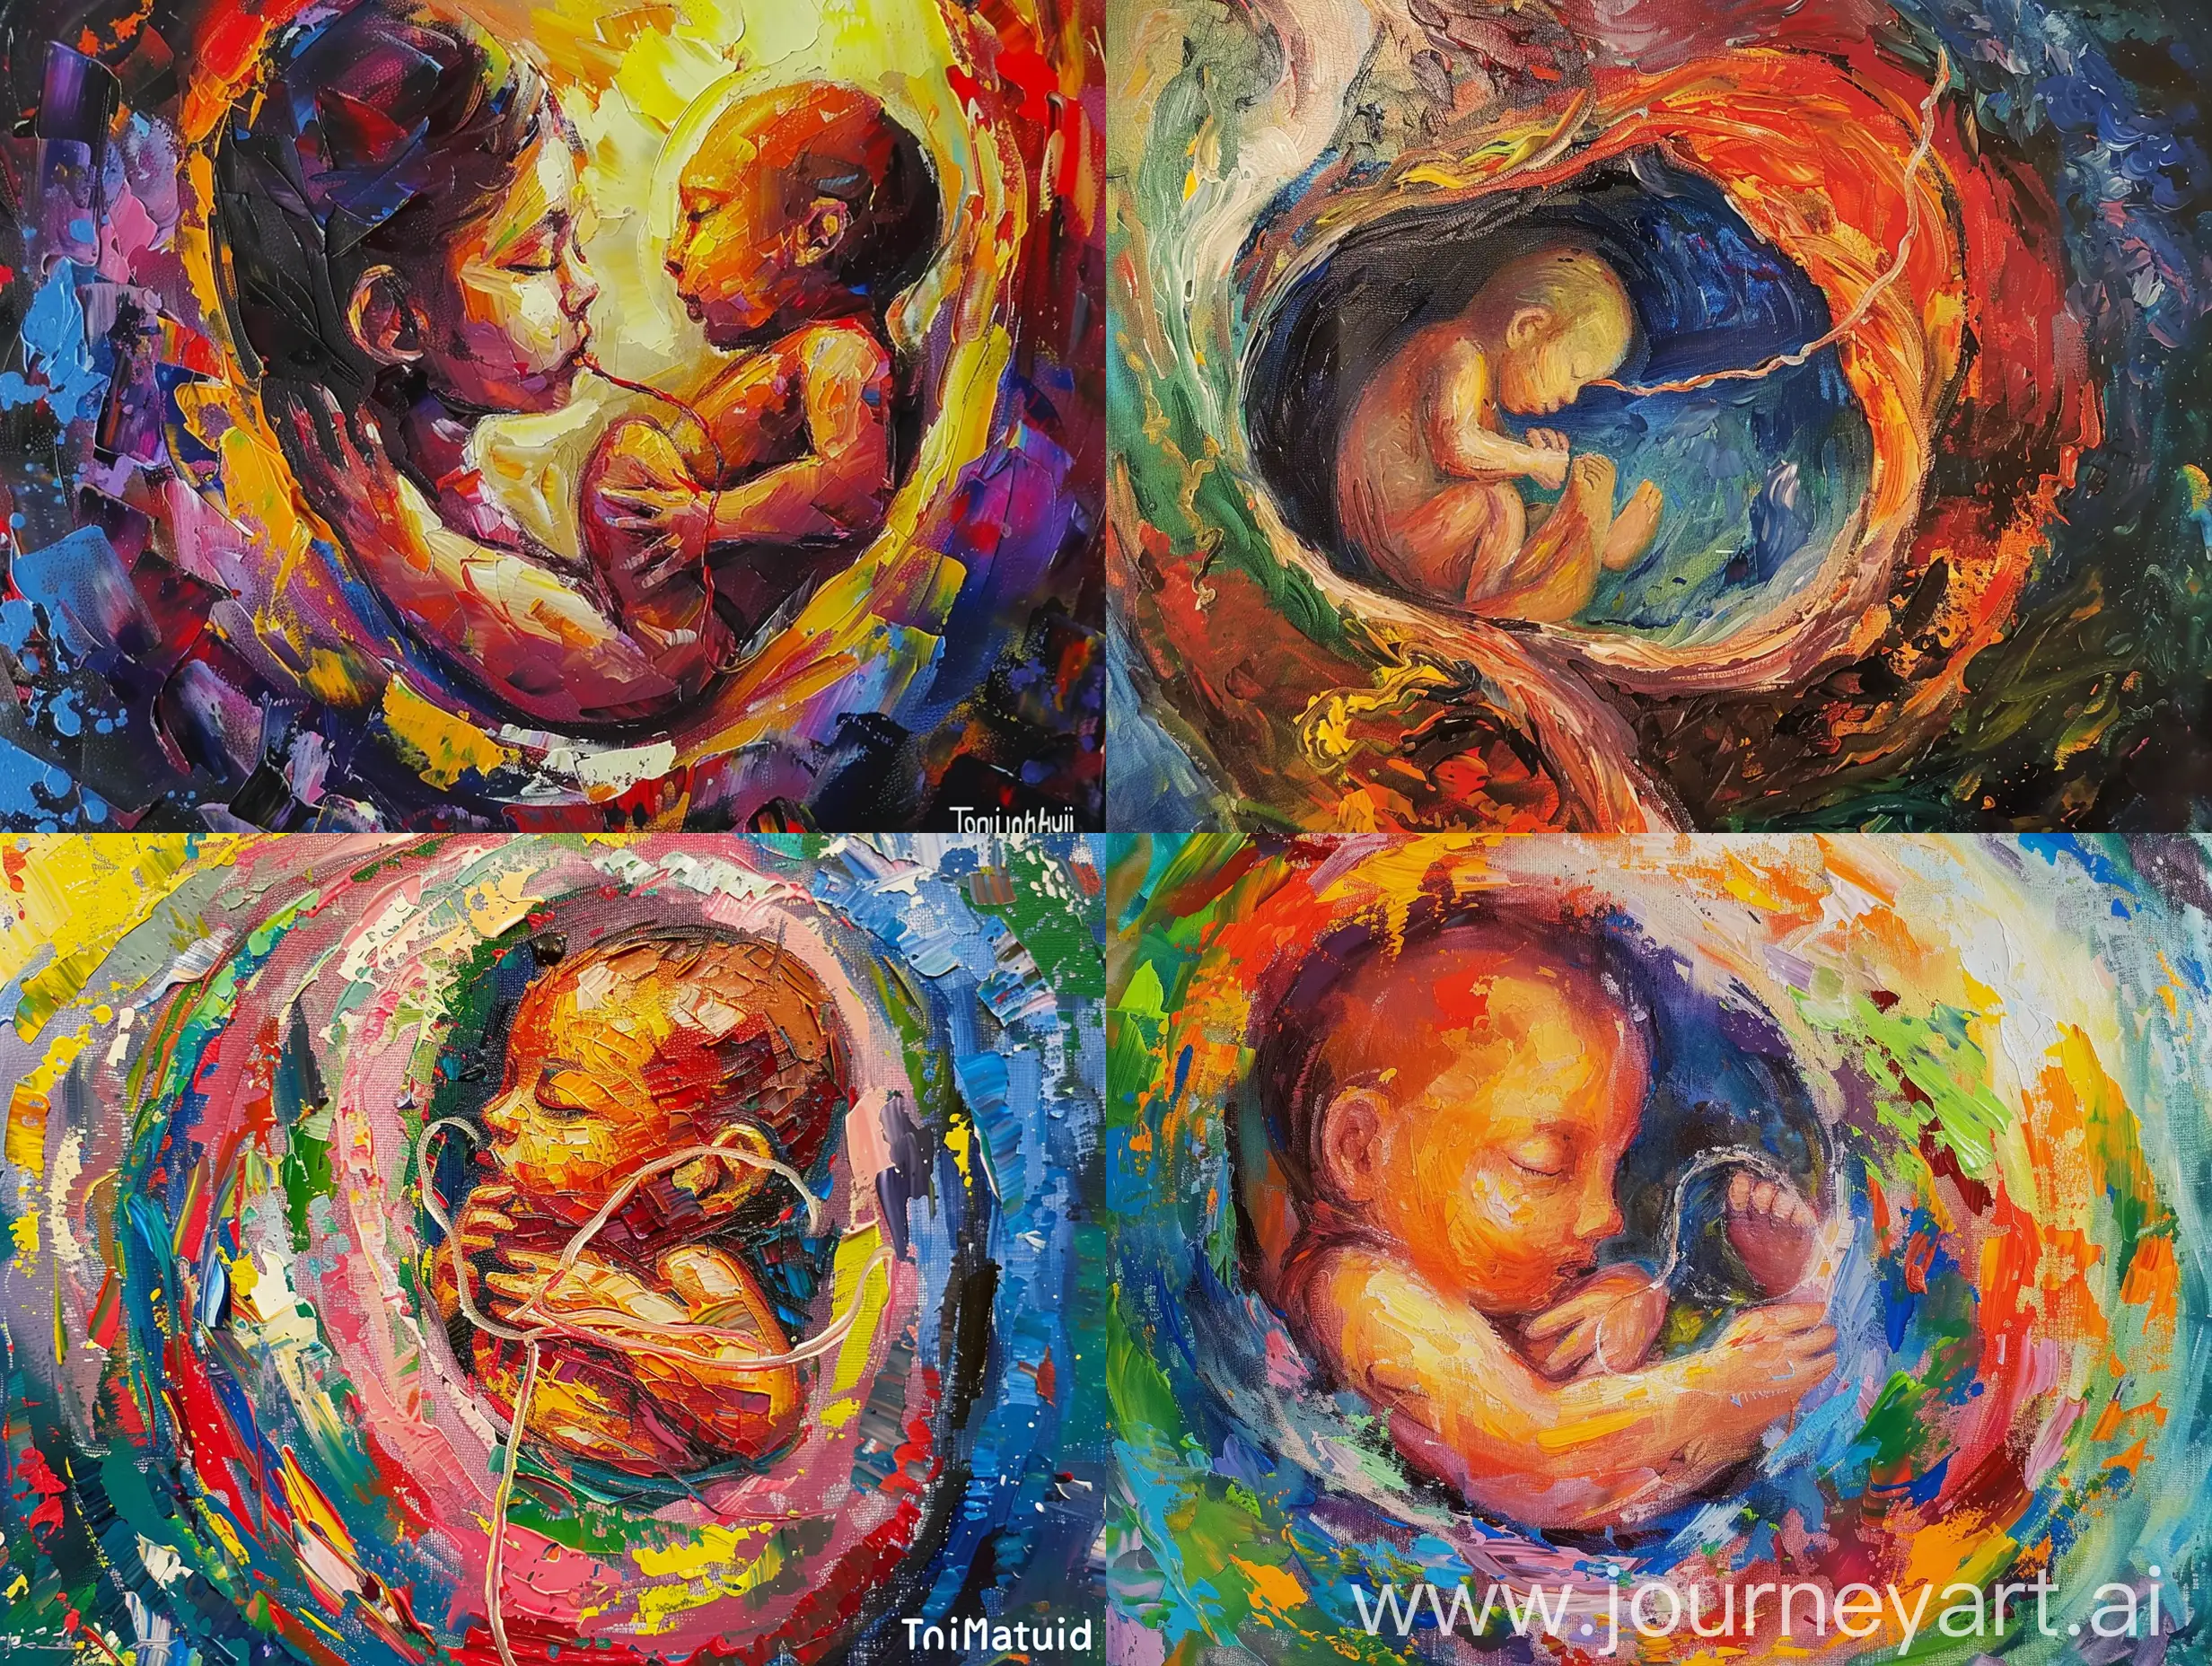 Impressionate-Toni-Mahfud-Style-Oil-Painting-Mother-and-Baby-with-Connected-Umbilical-Cord